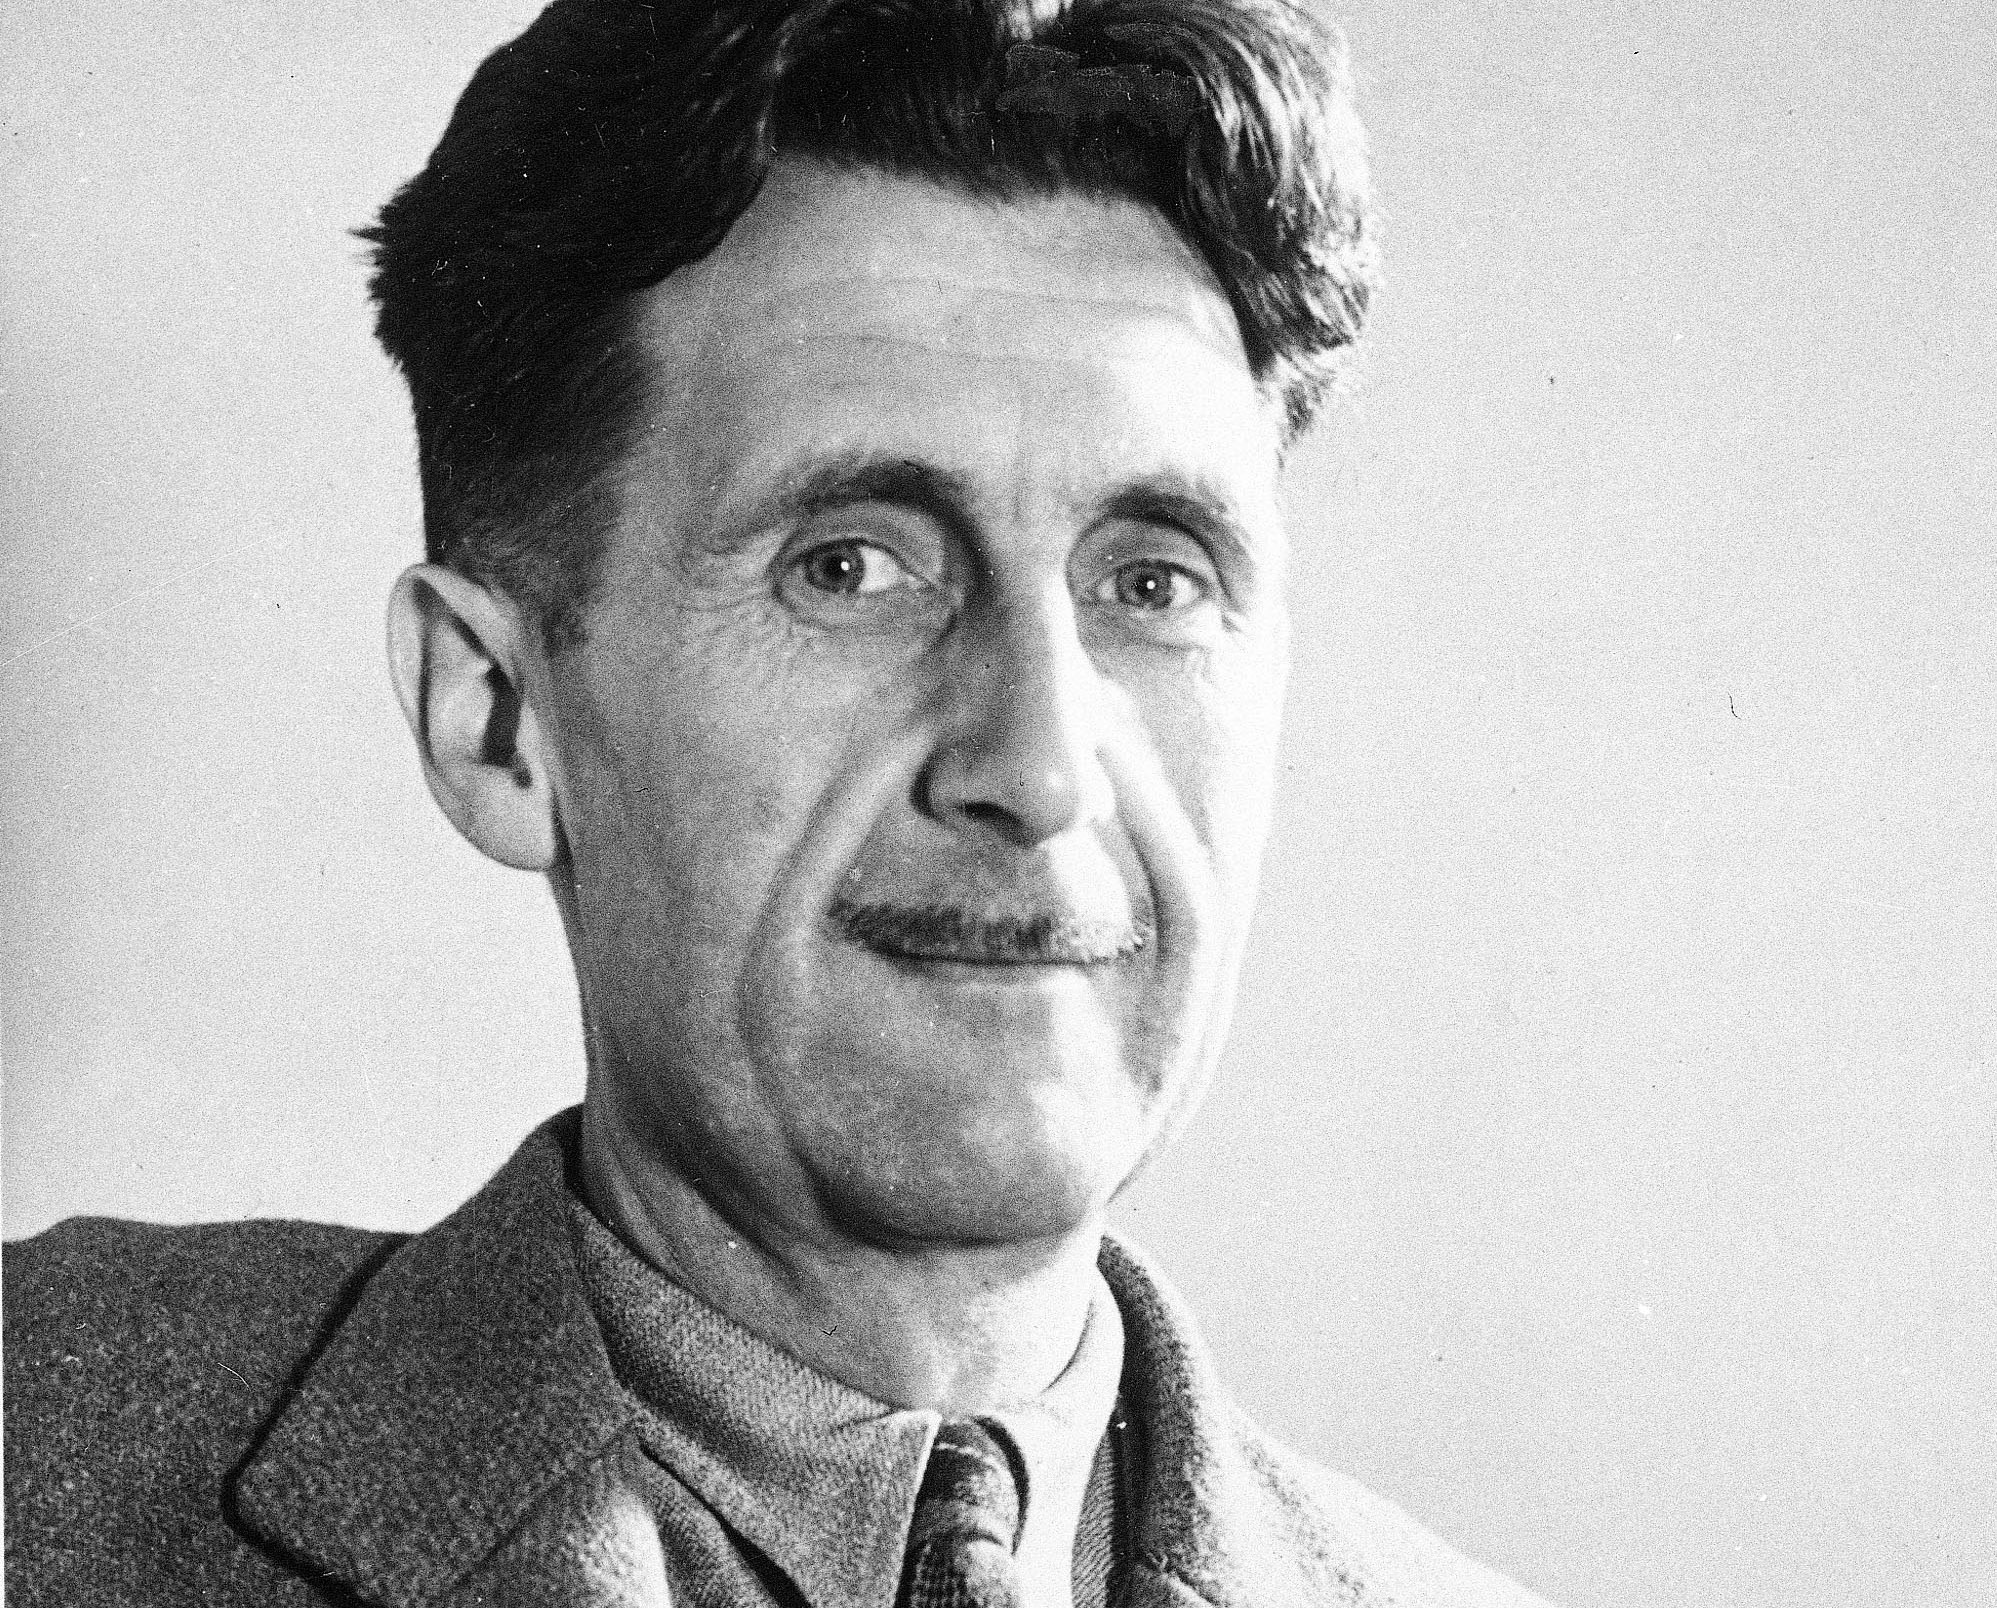 George Orwell's 1984 actually fits Putin's Russia